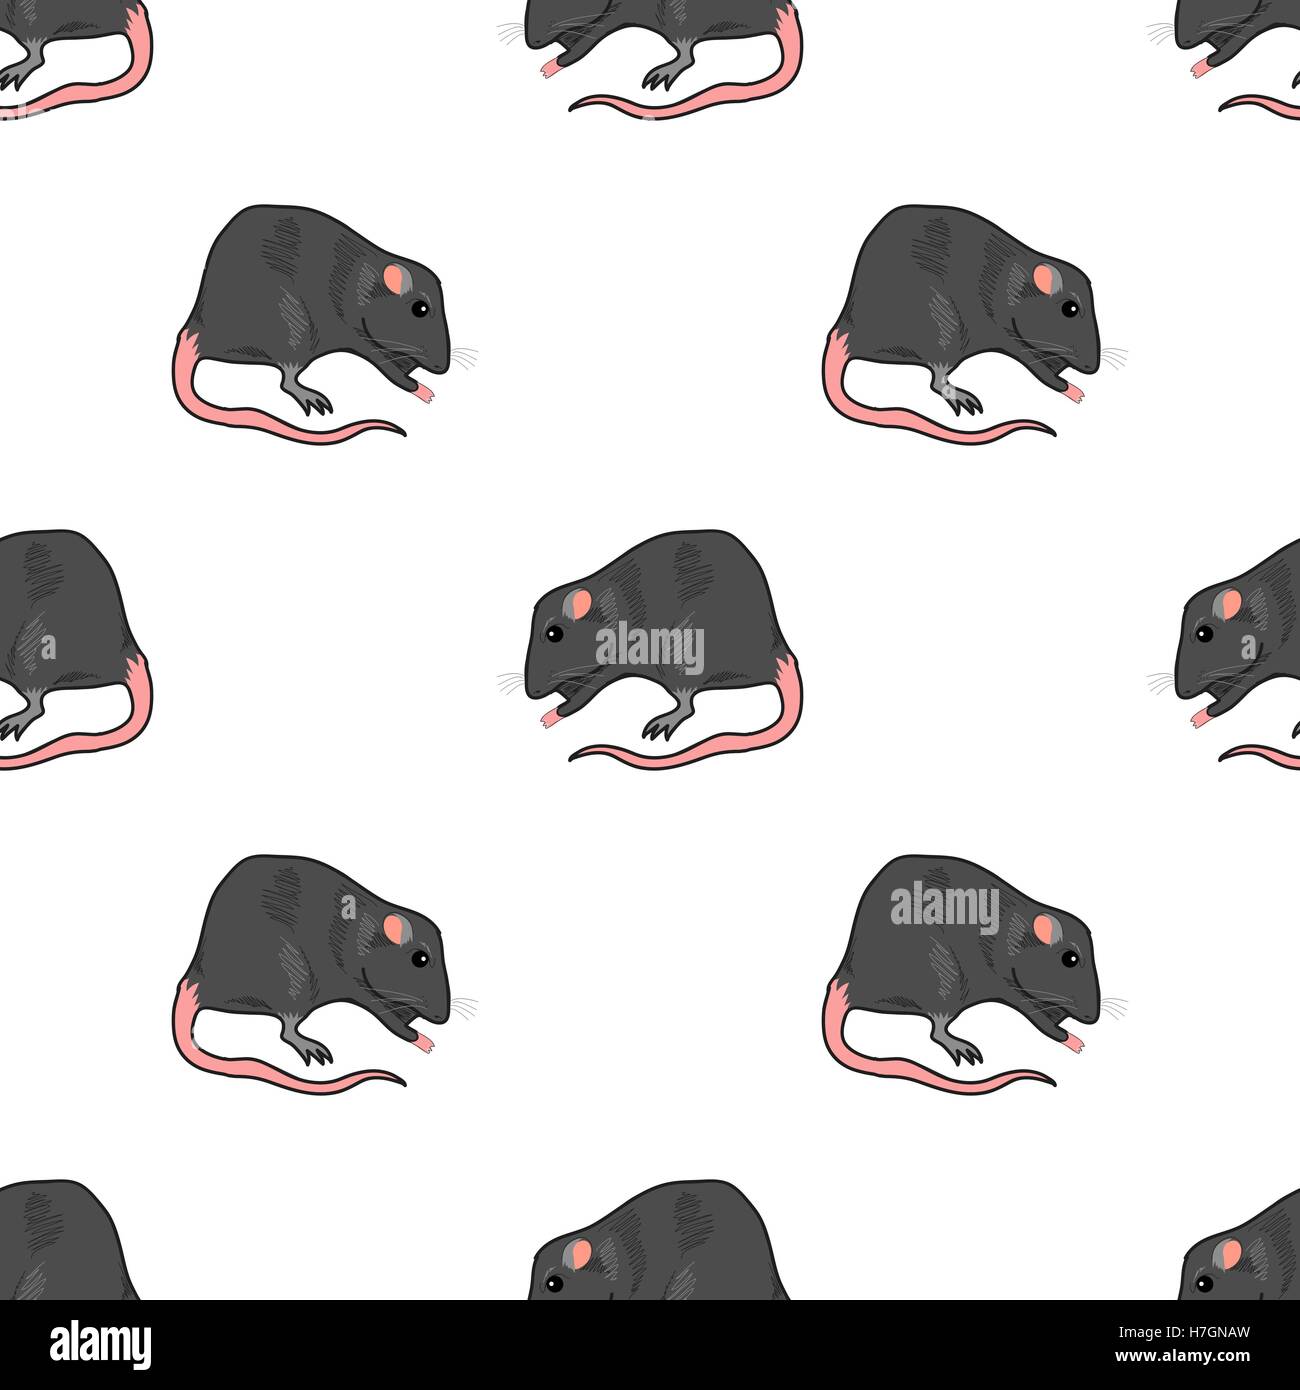 Domestic Rats Seamless Pattern Stock Vector